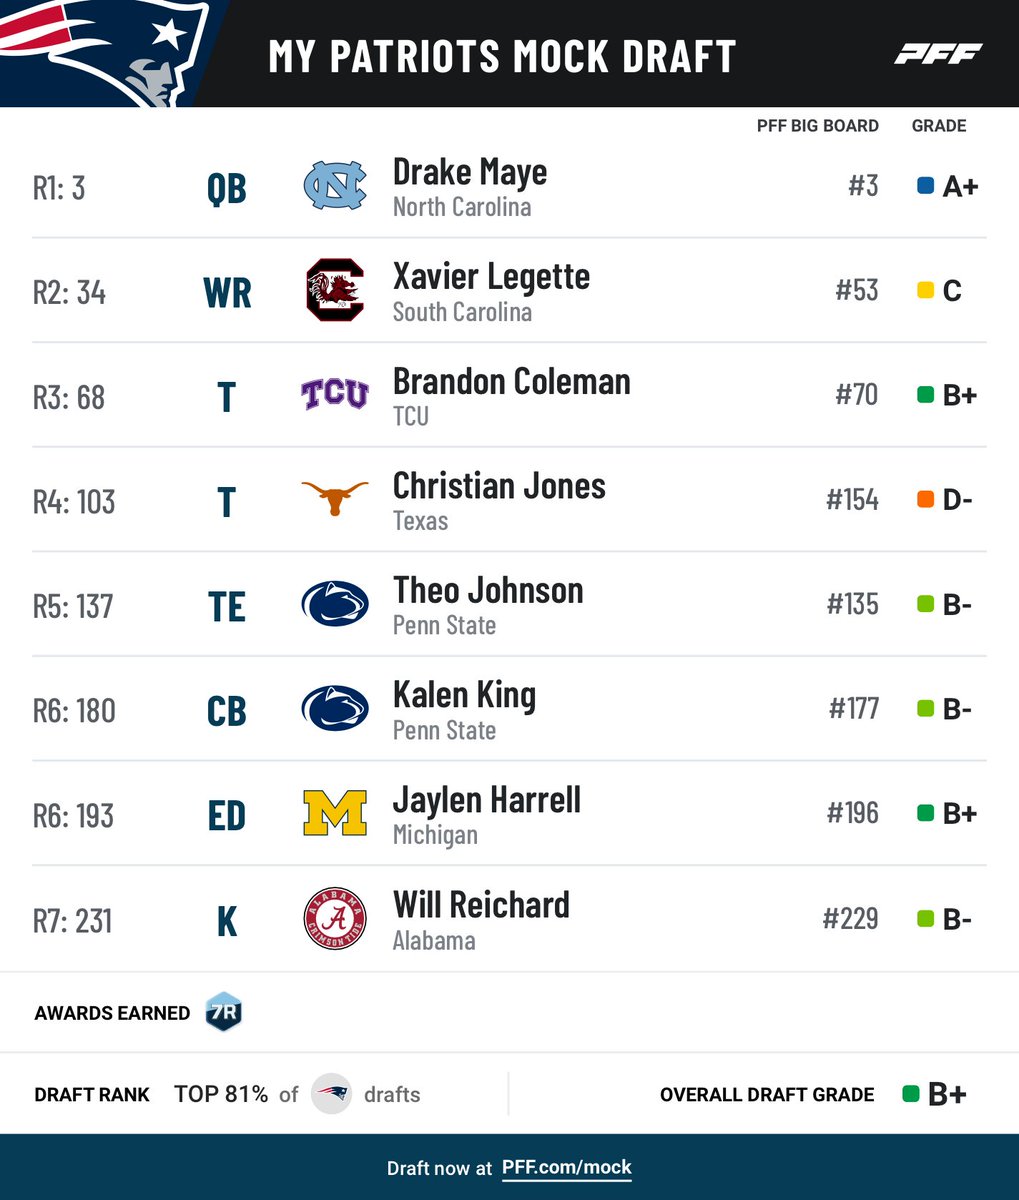 THE NFL DRAFT IS TOMORROW The time to draft is NOW: pff.com/mock